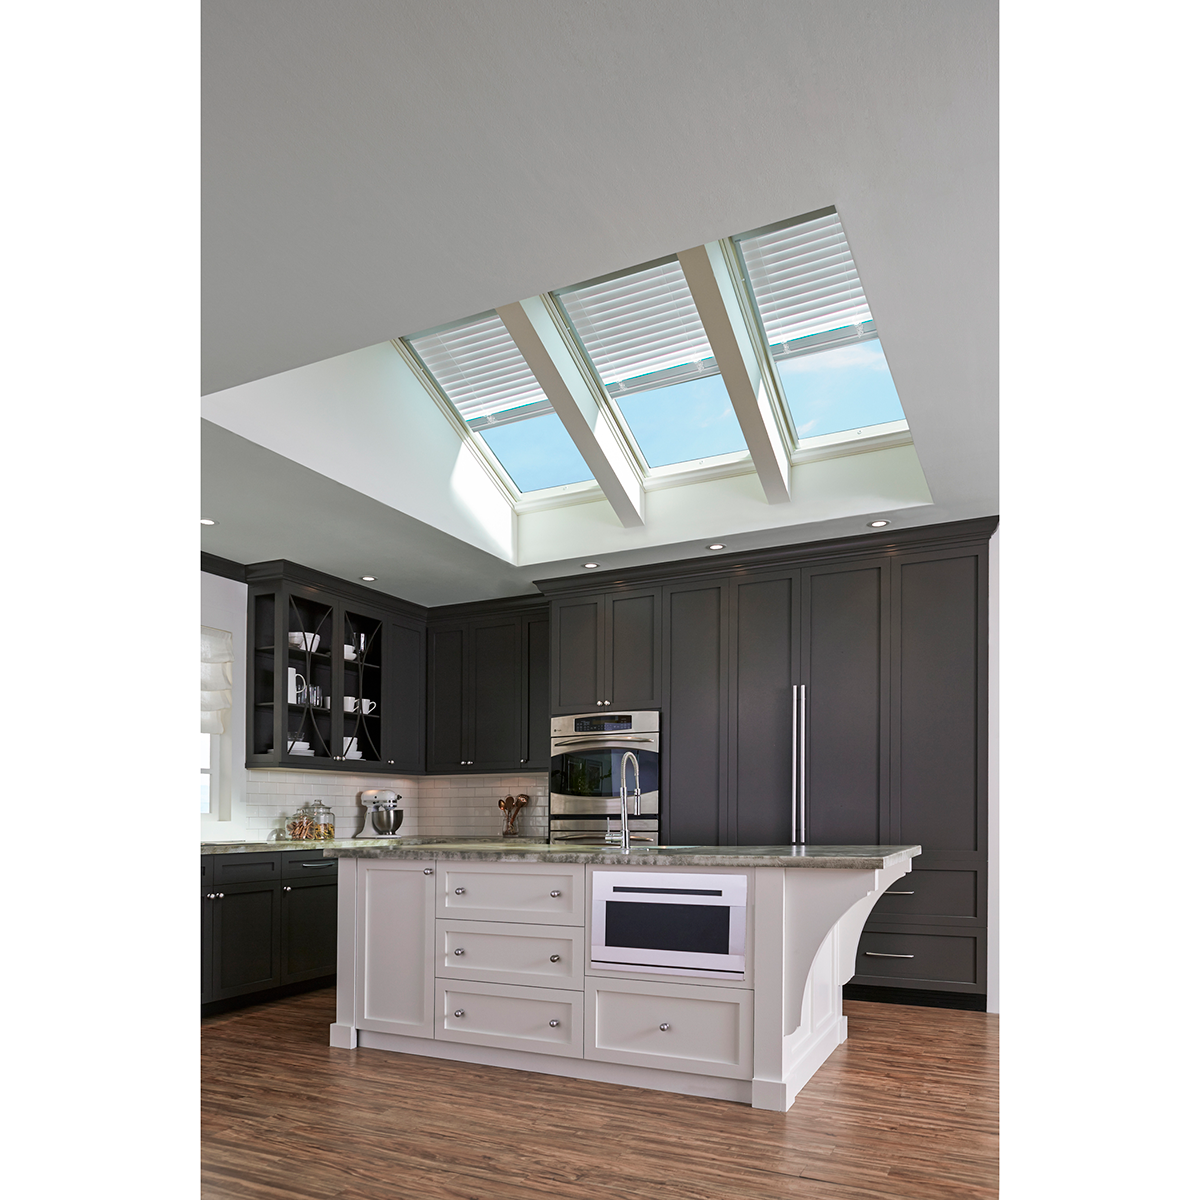 Fixed Curb-Mount Skylight with Laminated Low-E3 Glass - 14-1/2 in. x 46-1/2 in. - FCM 1446